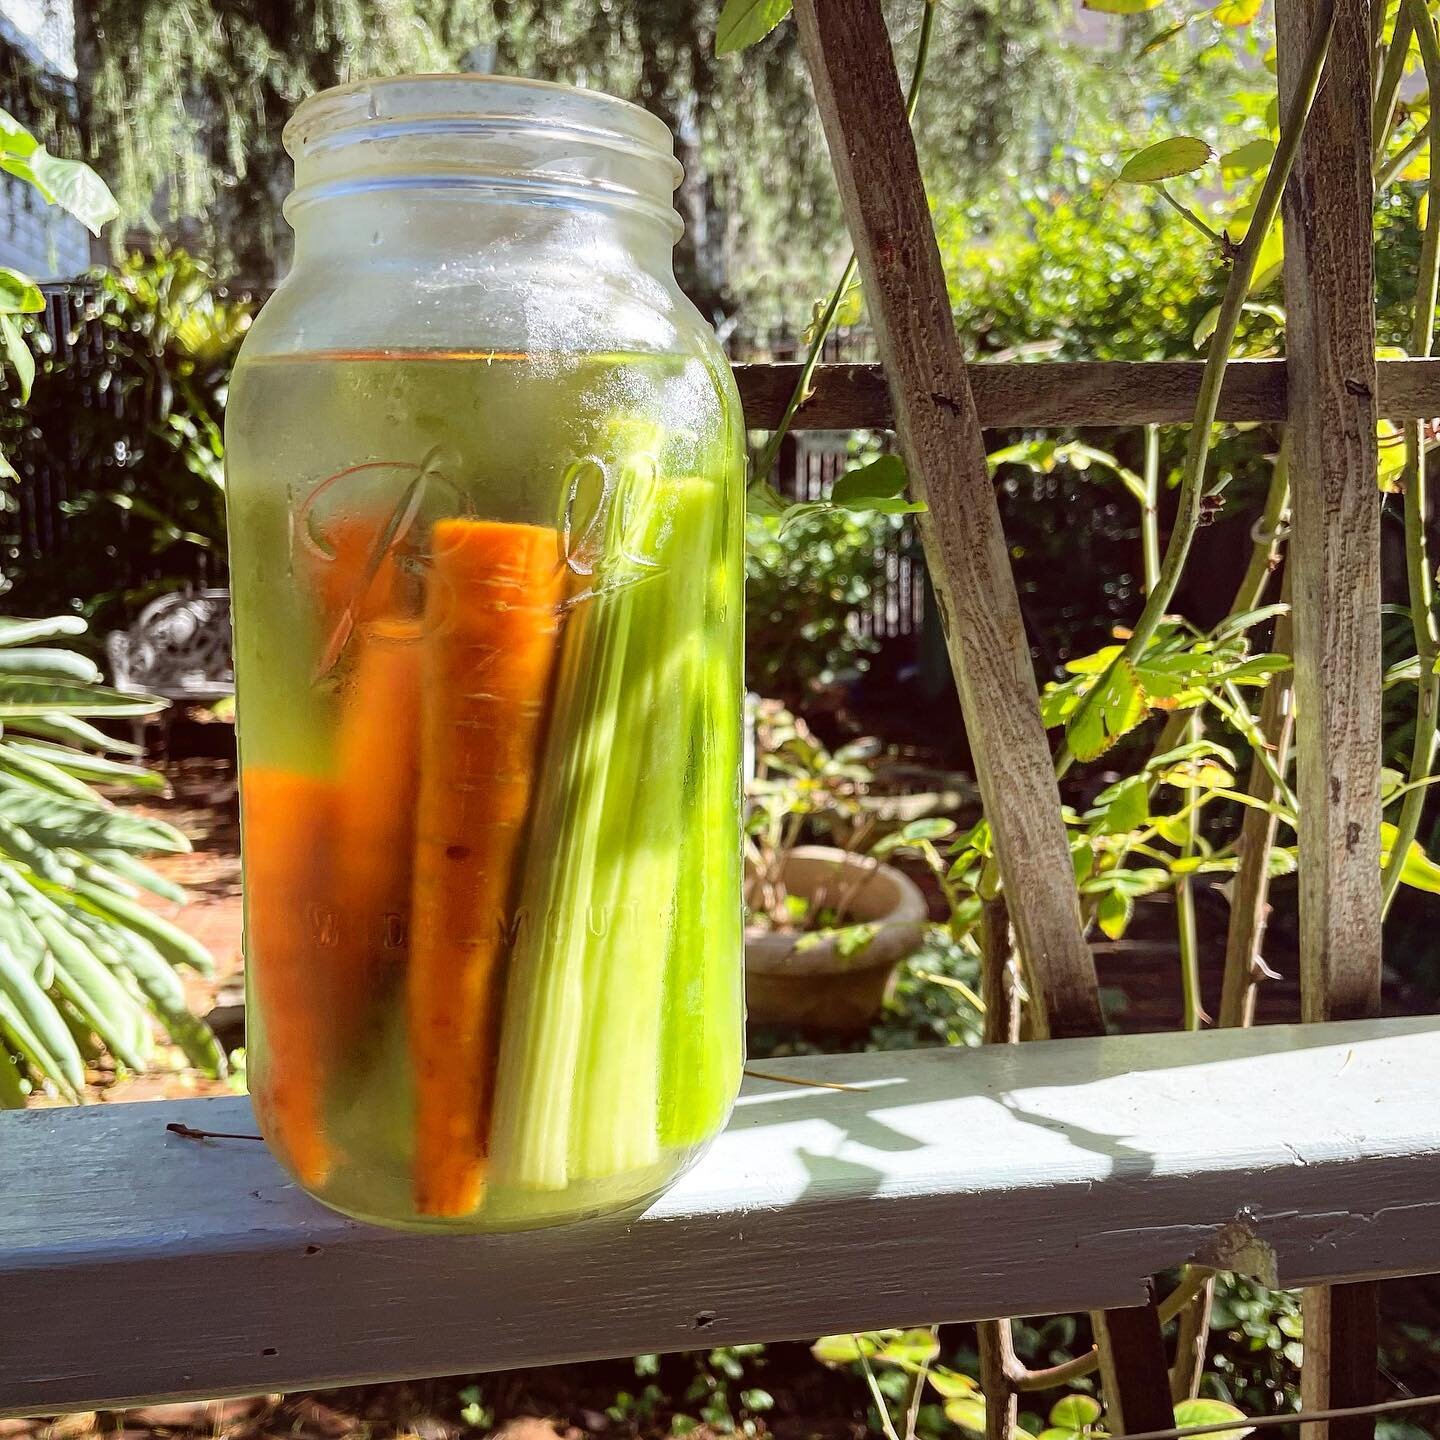 Eating veggies while they&rsquo;re fresh is always best, but to keep them from turning into a floppy rubbery mess, try keeping them in water until use. Snap! #freshveggies #snap #nofilter #nofoodshots #notintothesun #keepitcrisp